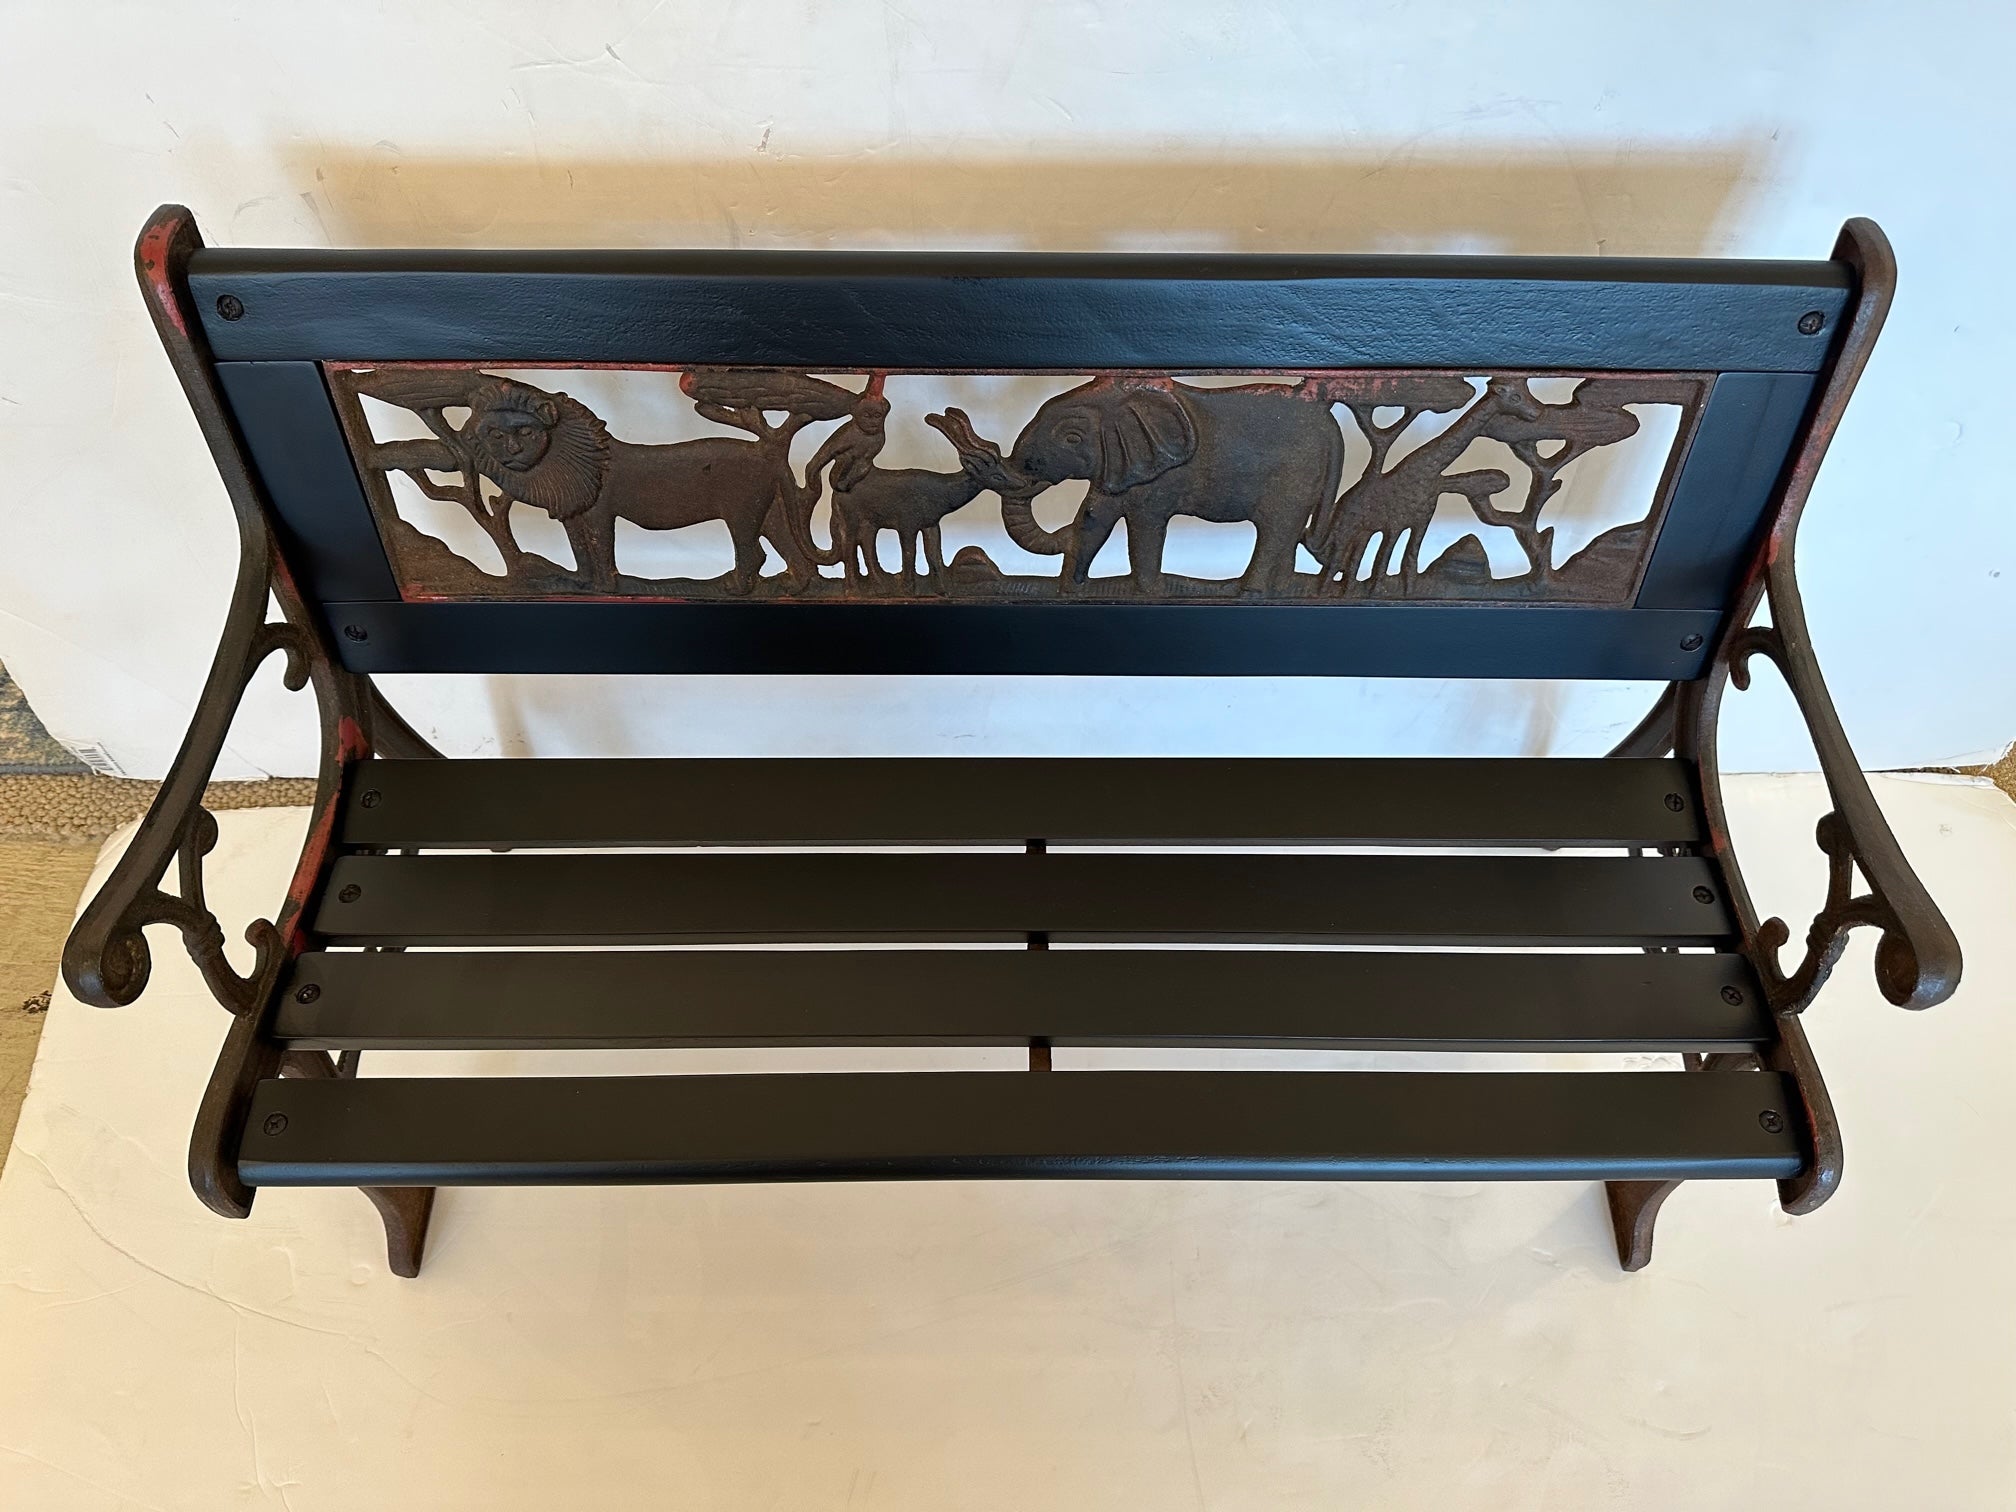 Delightful child size iron and wood bench having a Noah's ark of animals adorning it.
All wood is new and painted with automotive paint so it can be outdoors. 
